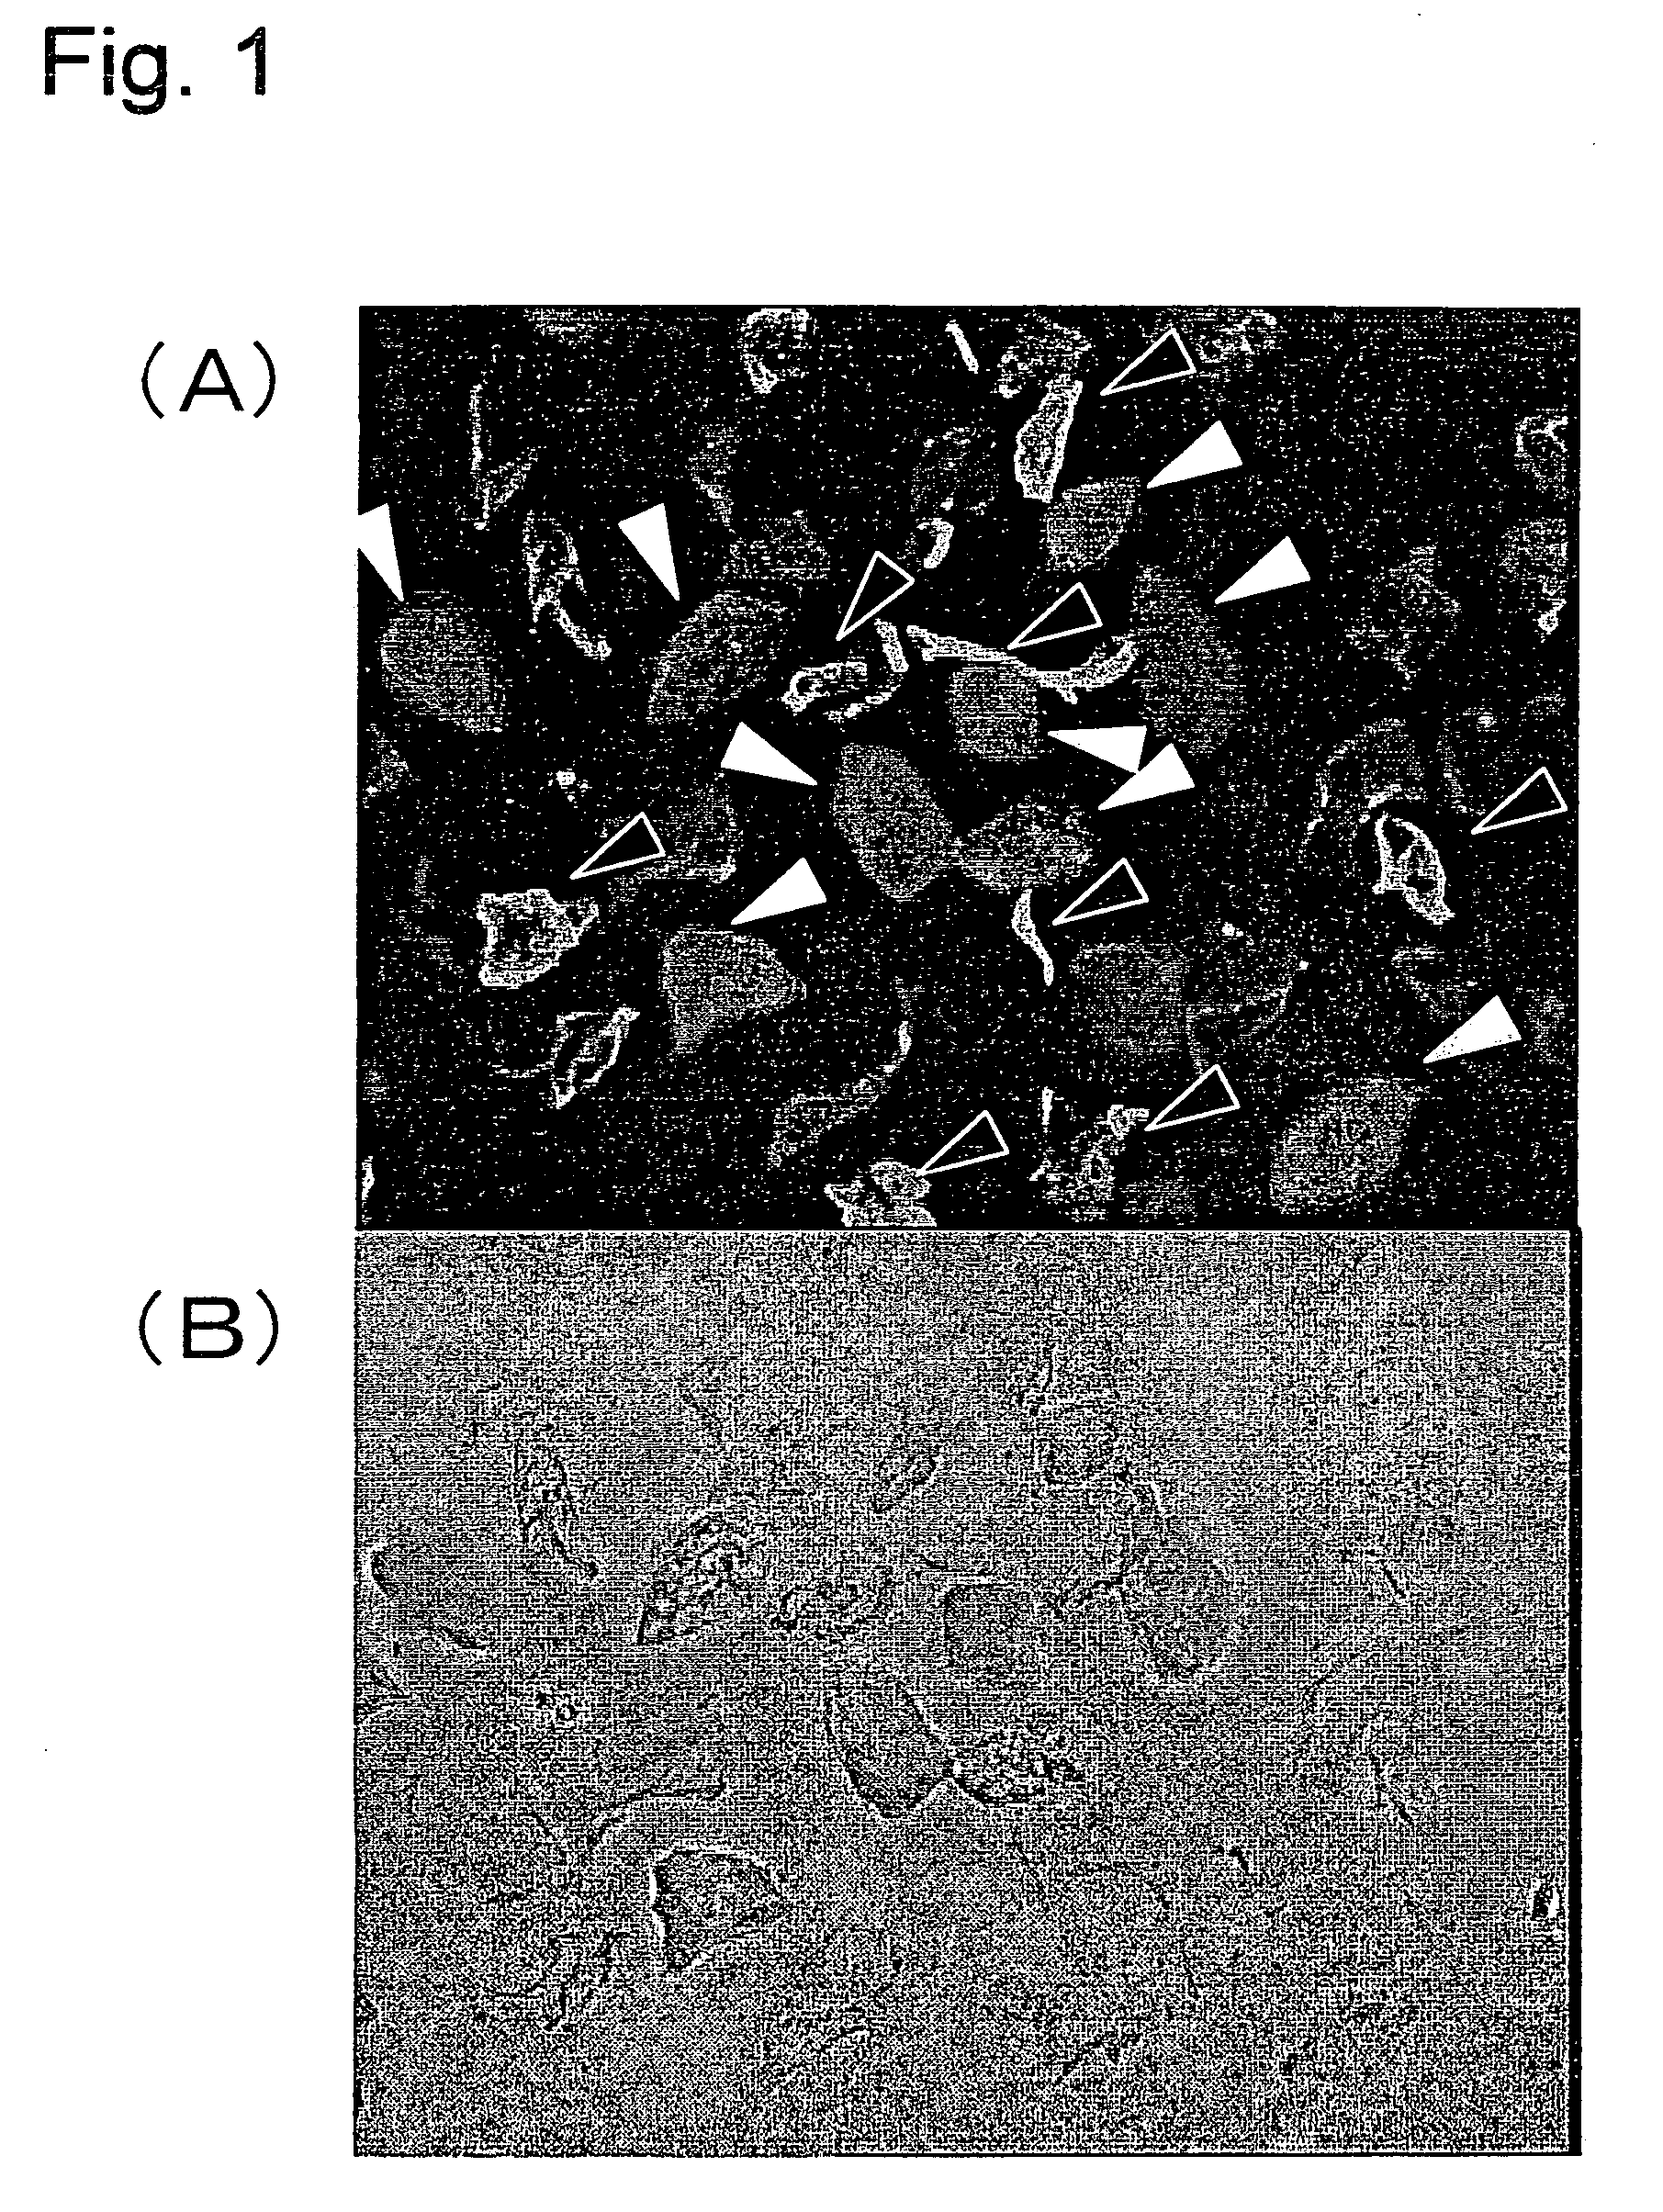 Method for evaluating the degree of maturity of corneocytes